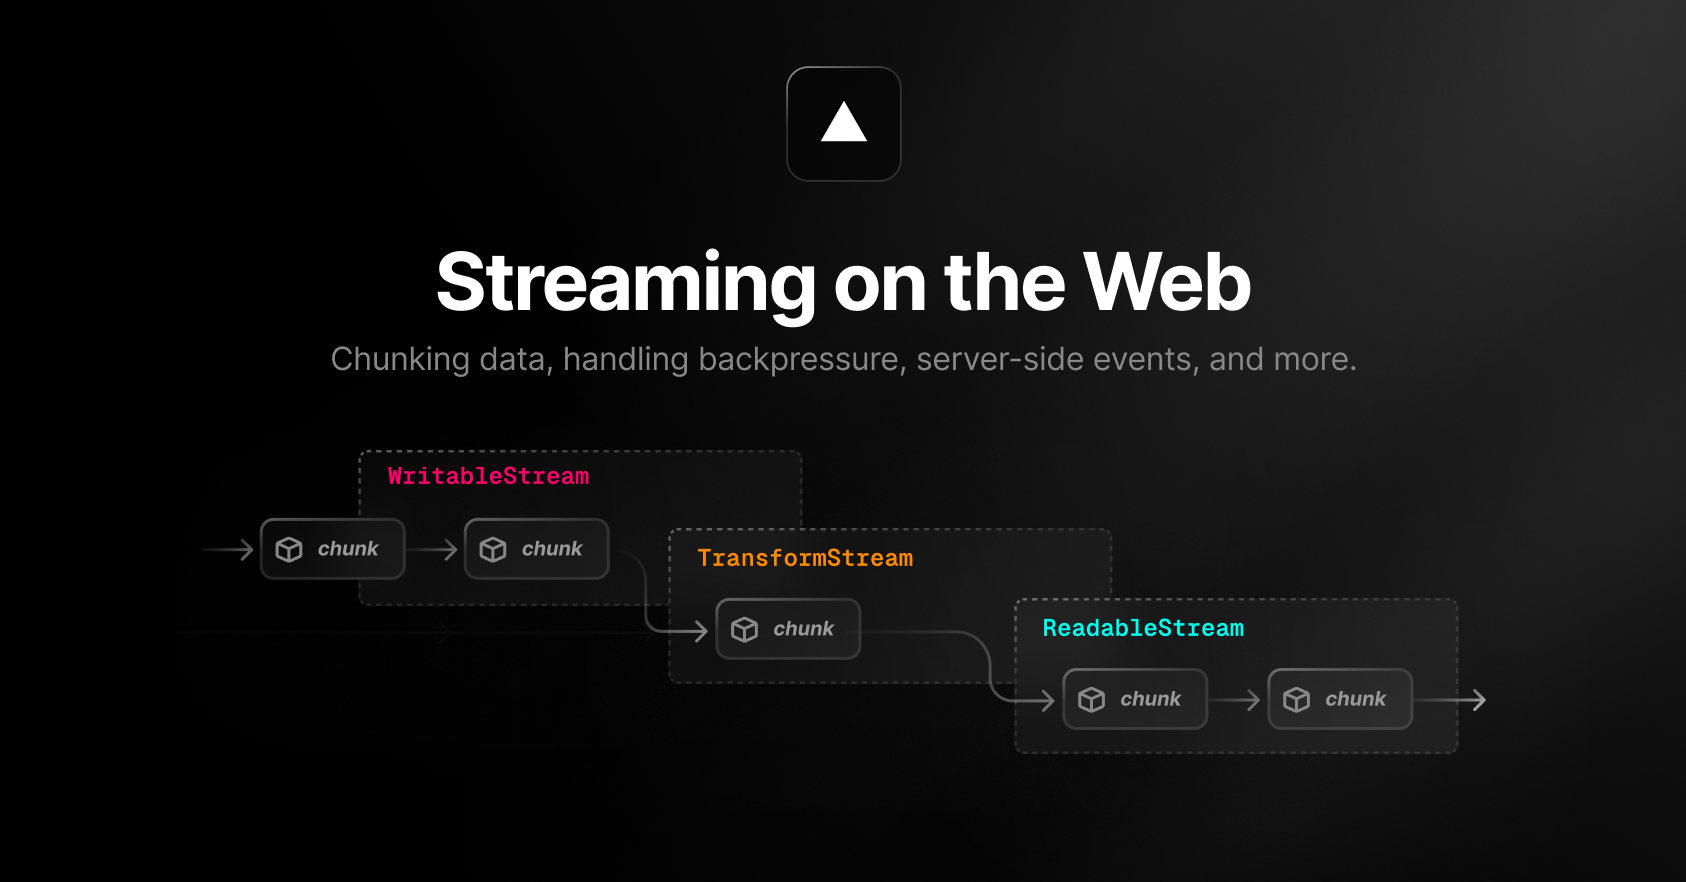 An Introduction to Streaming on the Web by Lydia Hallie